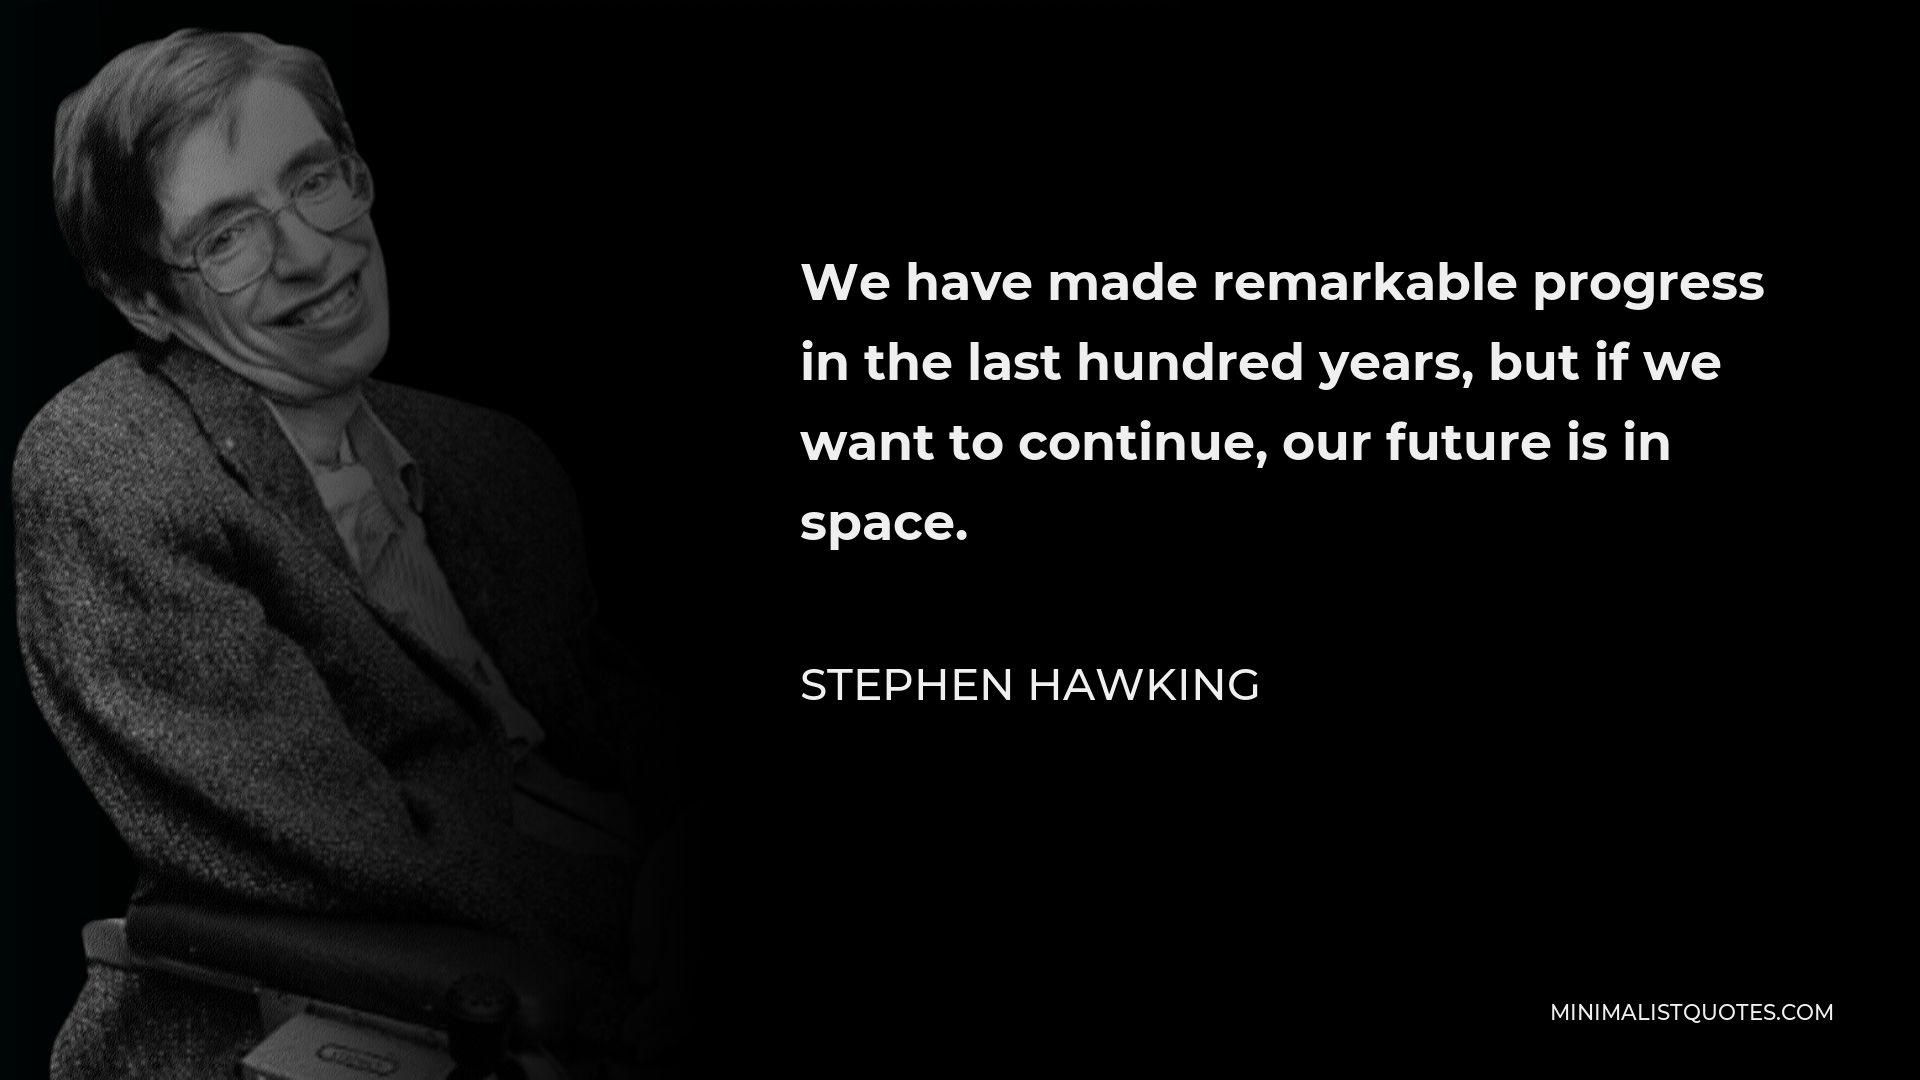 Stephen Hawking Quote - We have made remarkable progress in the last hundred years, but if we want to continue, our future is in space.